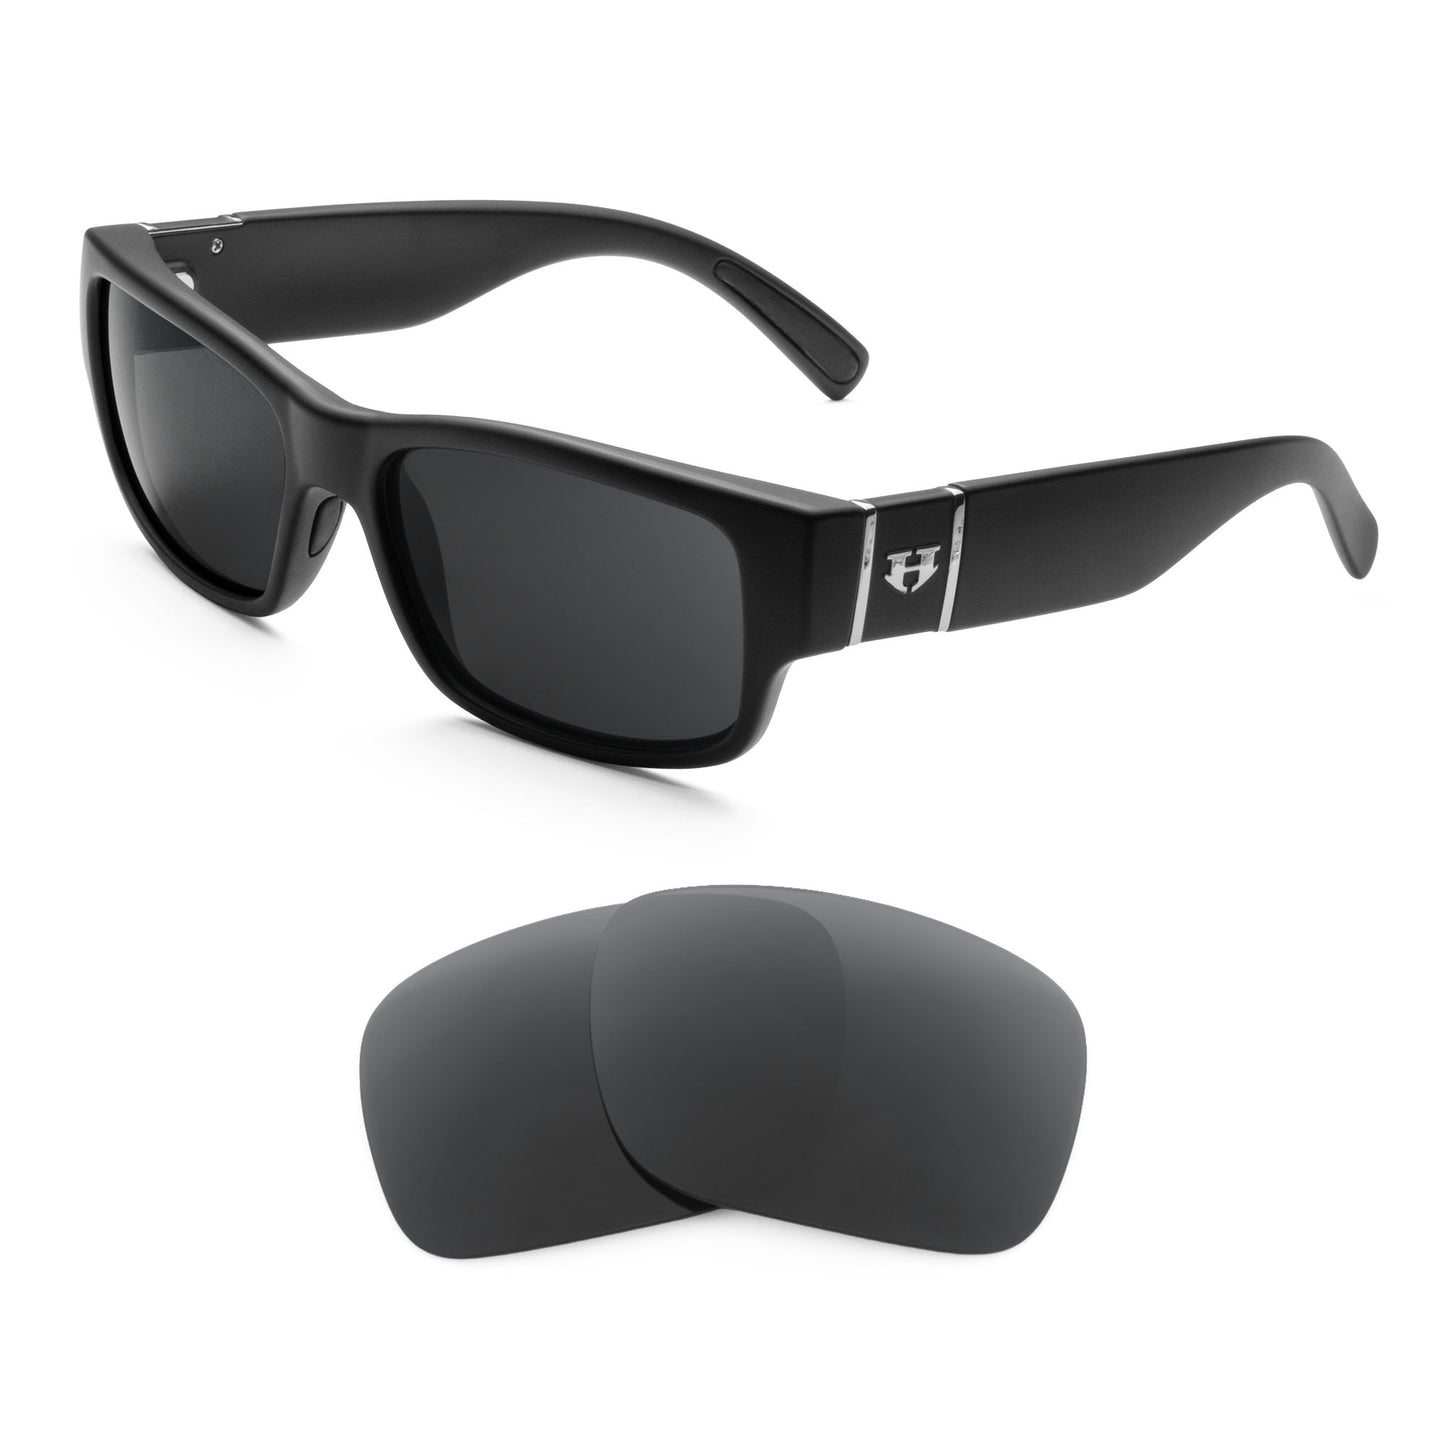 Hoven The Knucklehead sunglasses with replacement lenses